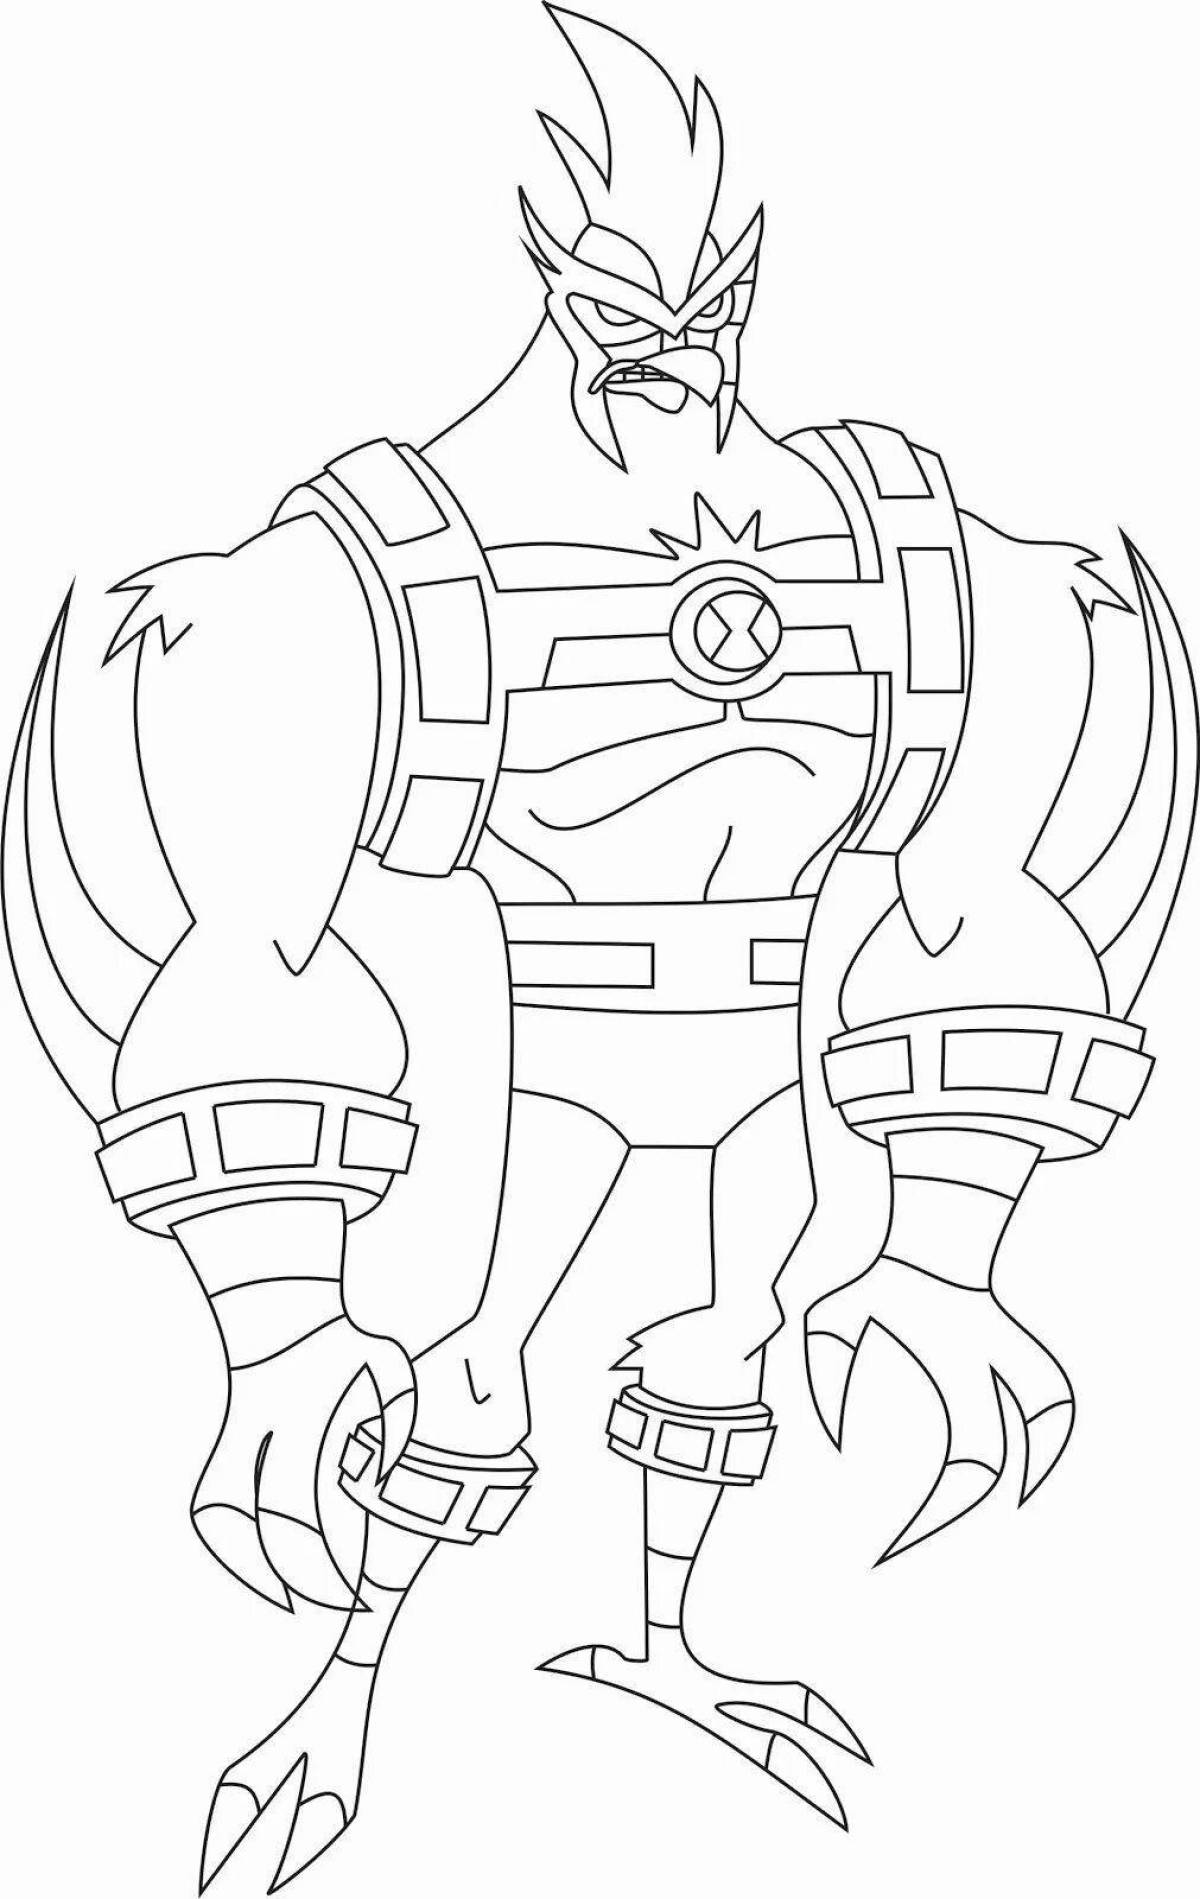 Playful ben 10 omniverse coloring page